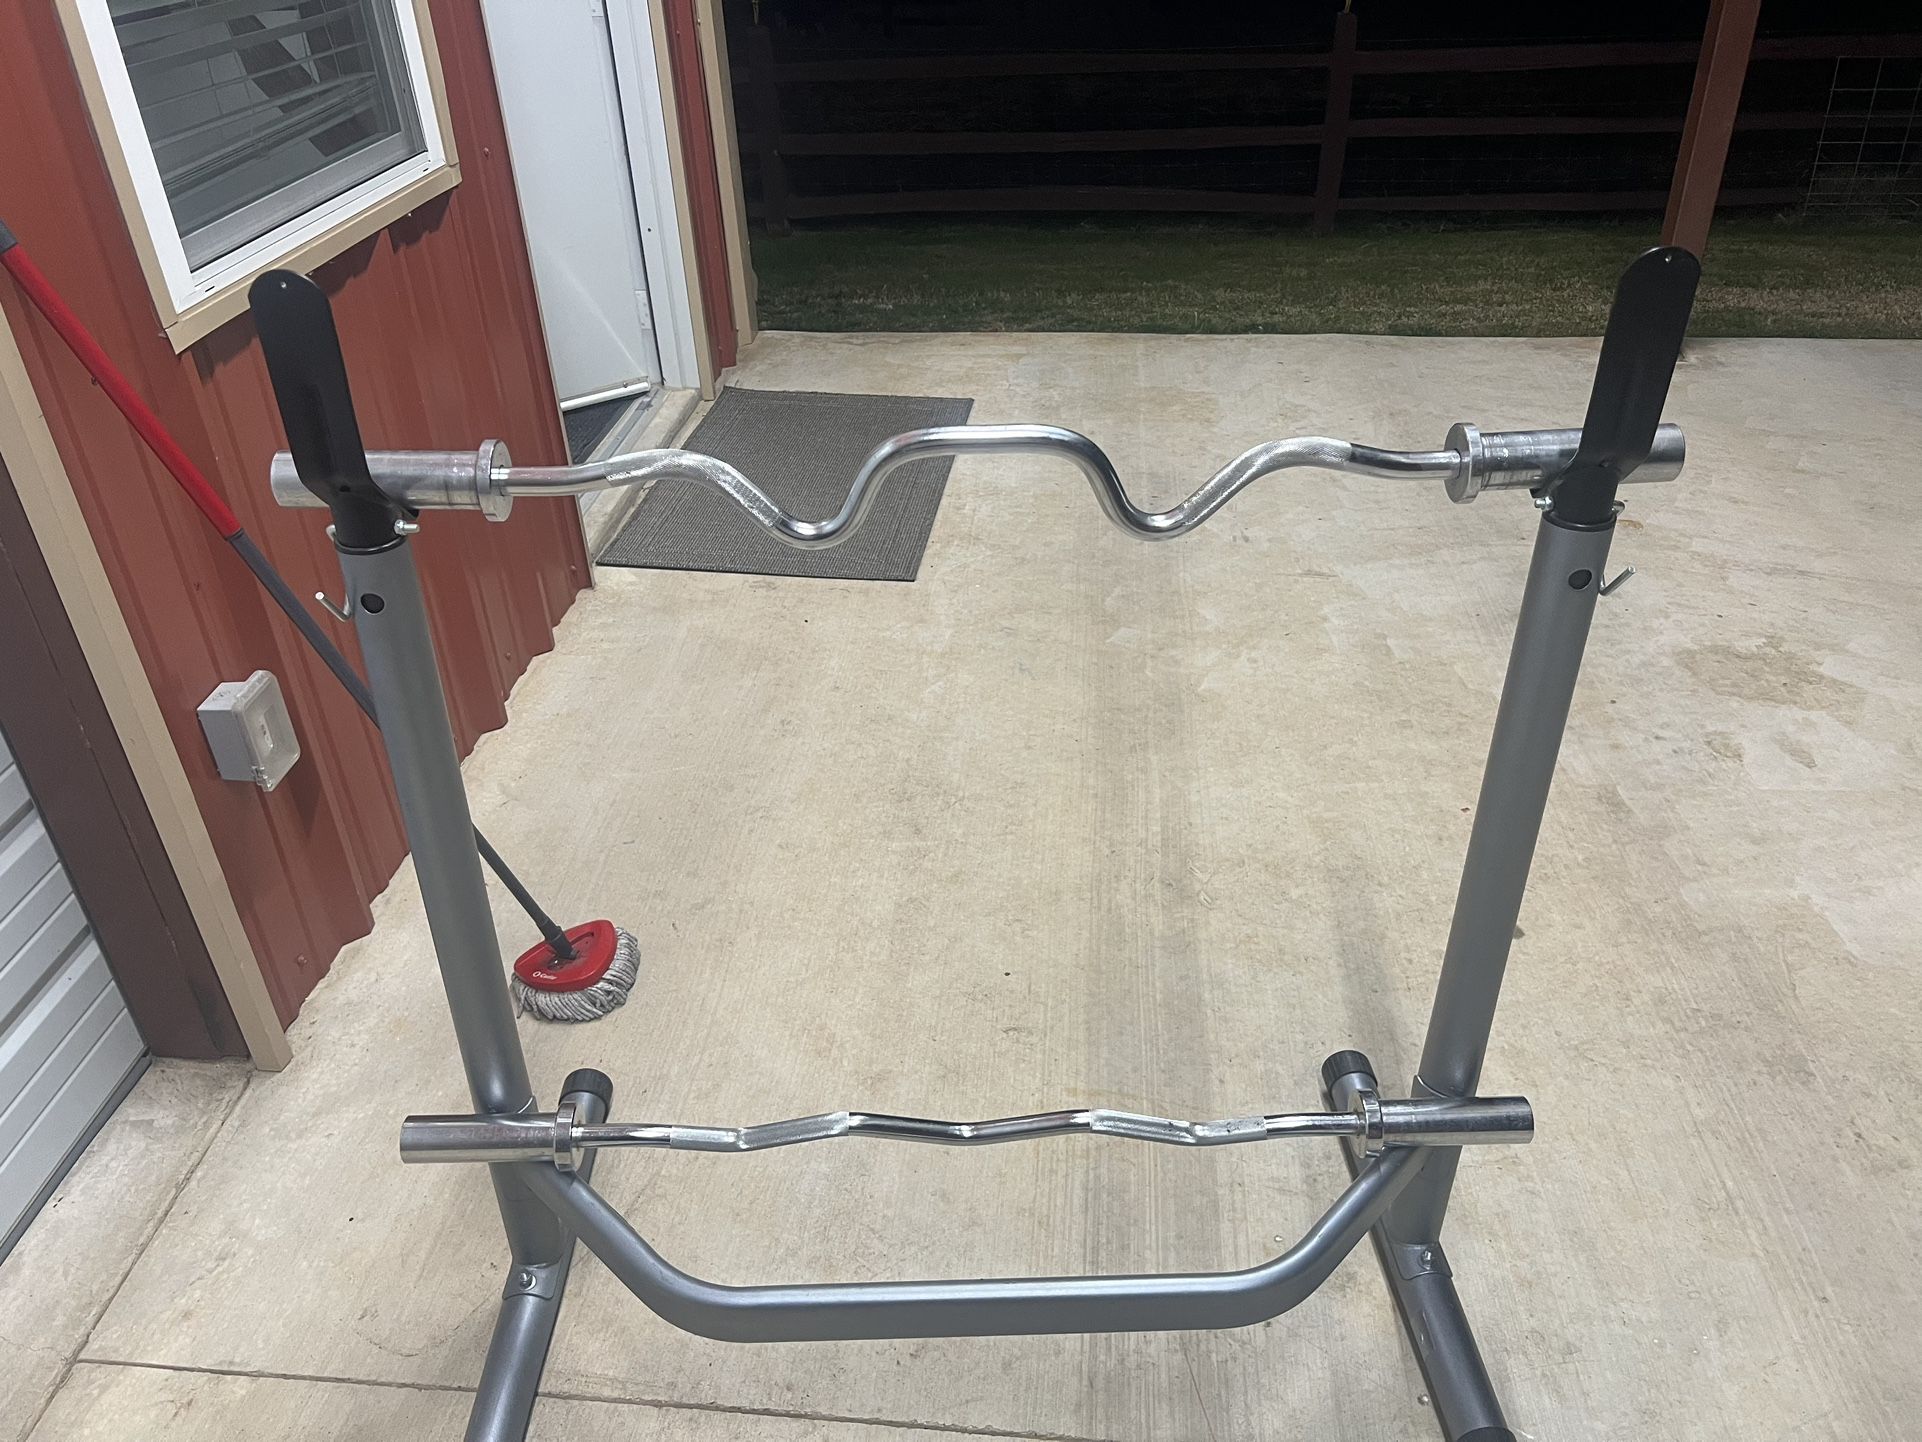 2 Curl Bars With Stand And Bench